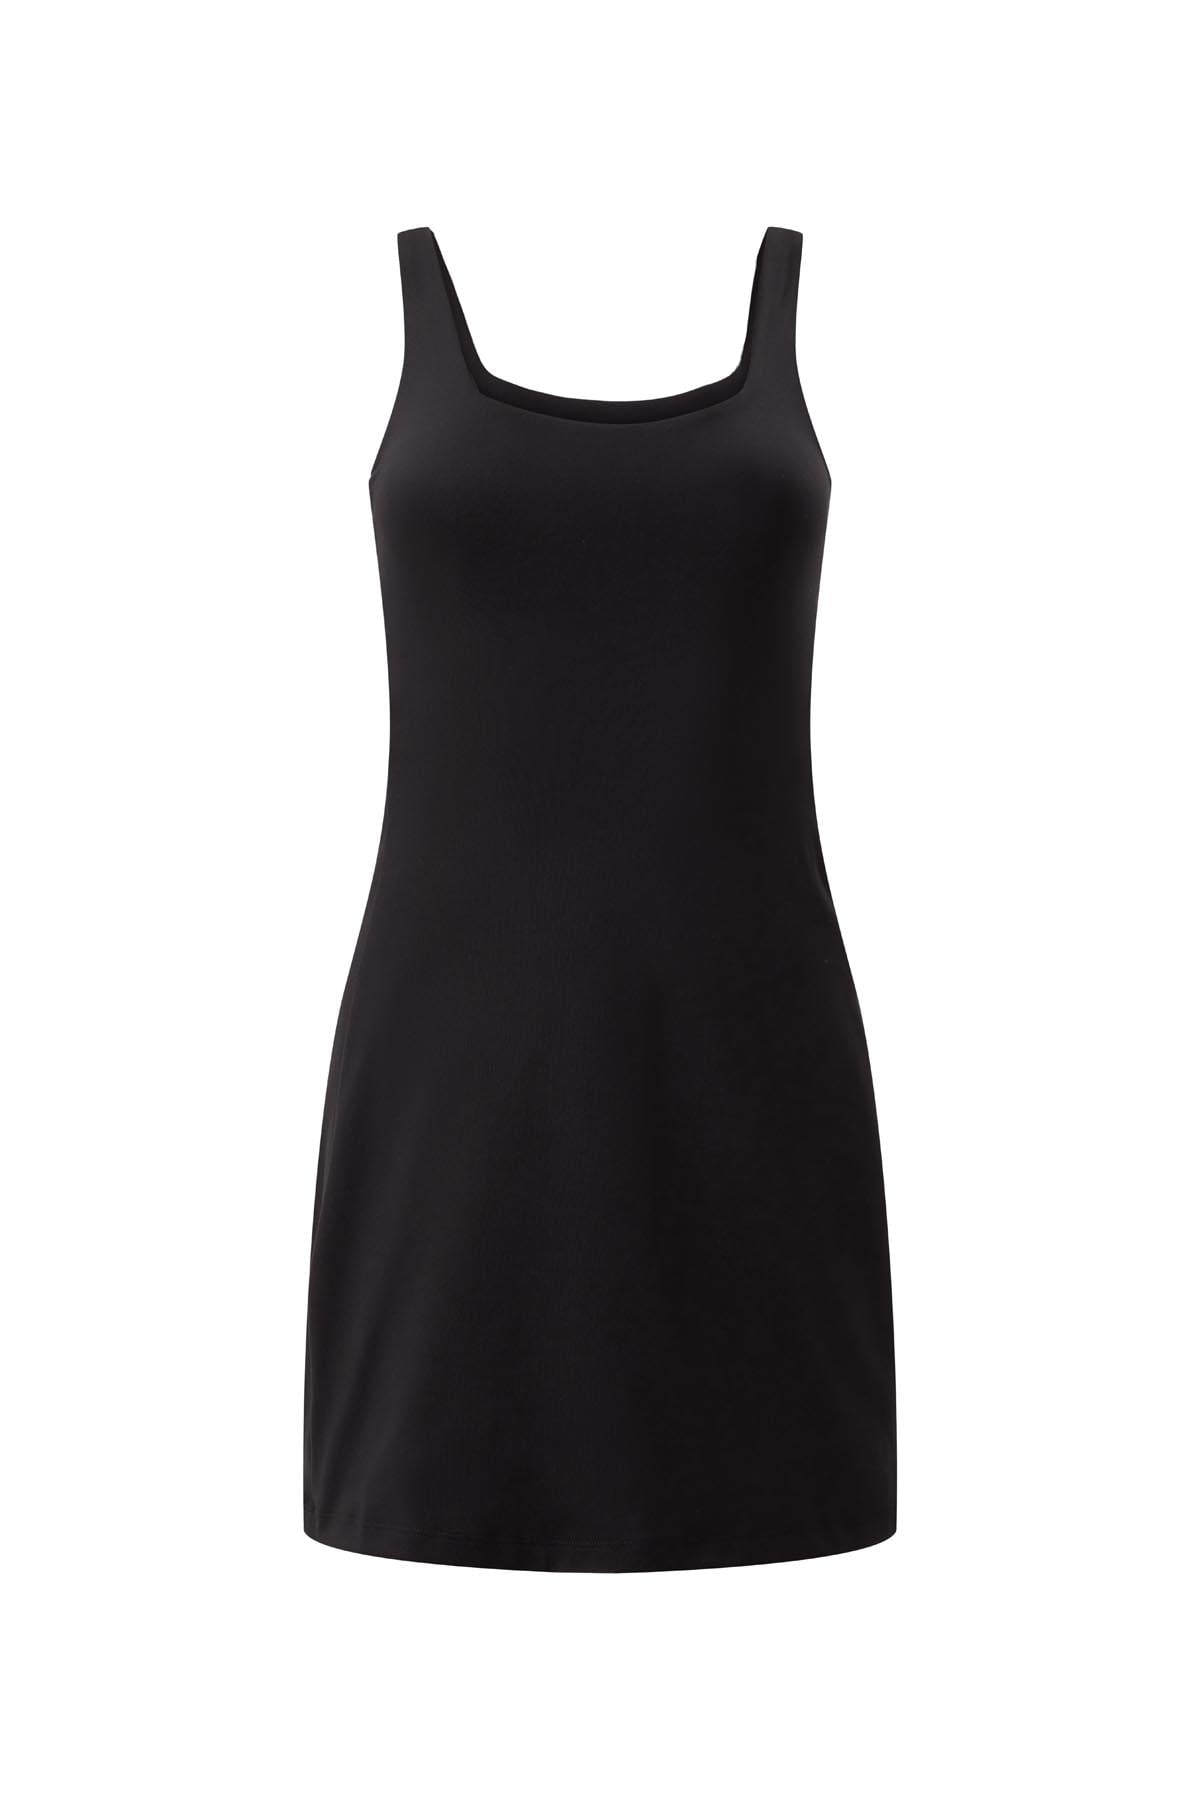 Girlfriend Collective - Tommy Dress - Black